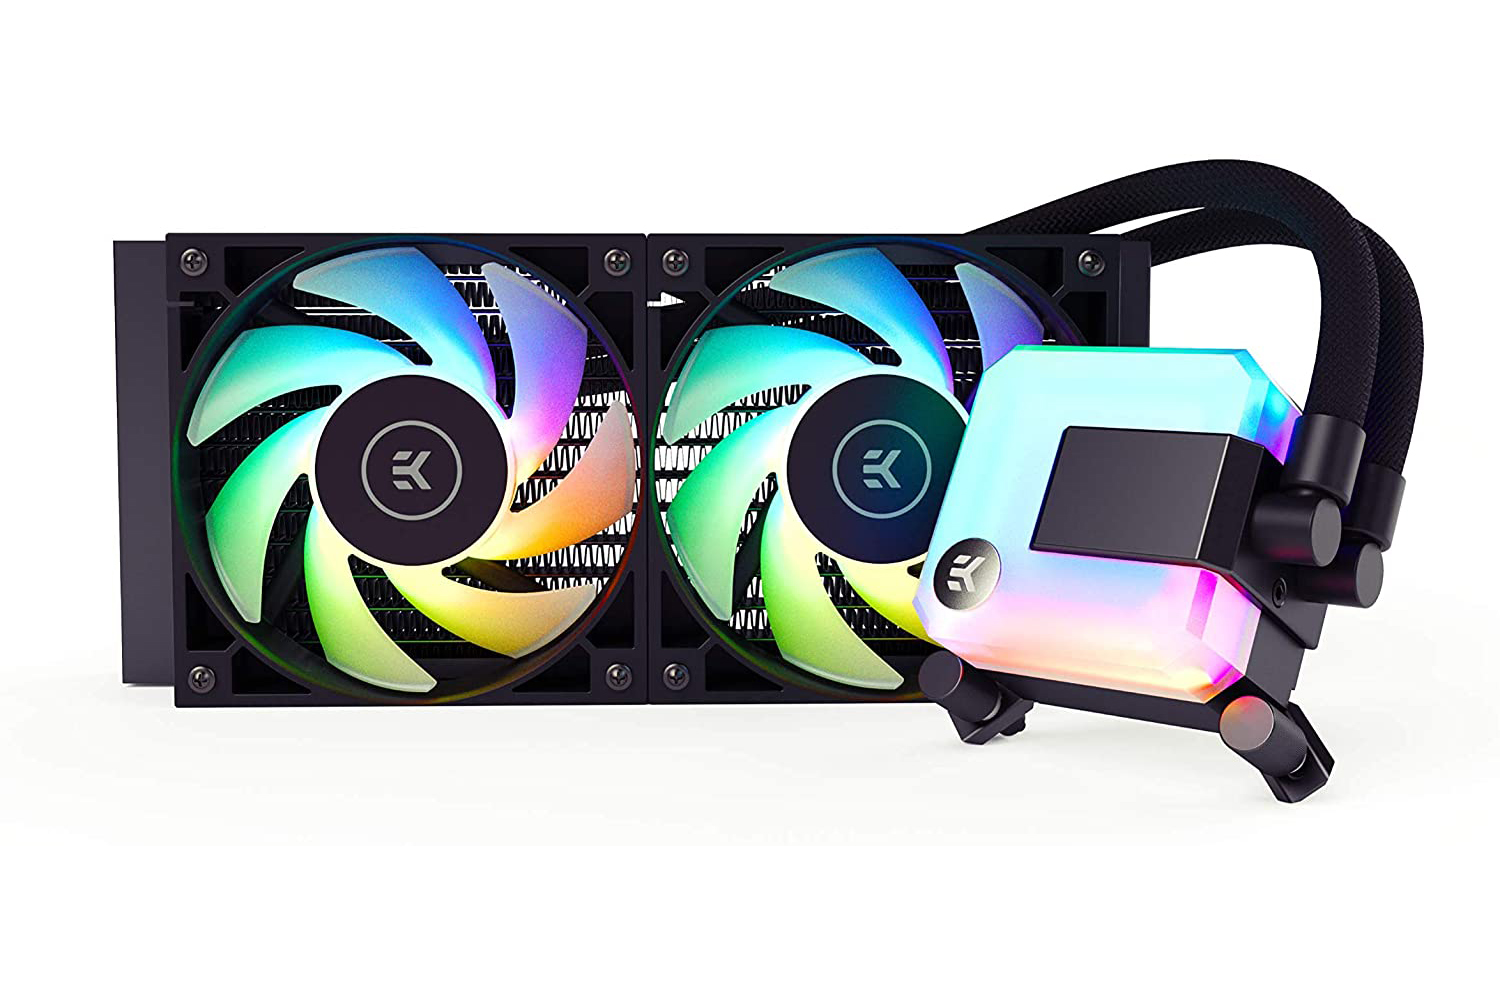 The EK-AIO 240 D-RGB all in one cooler.